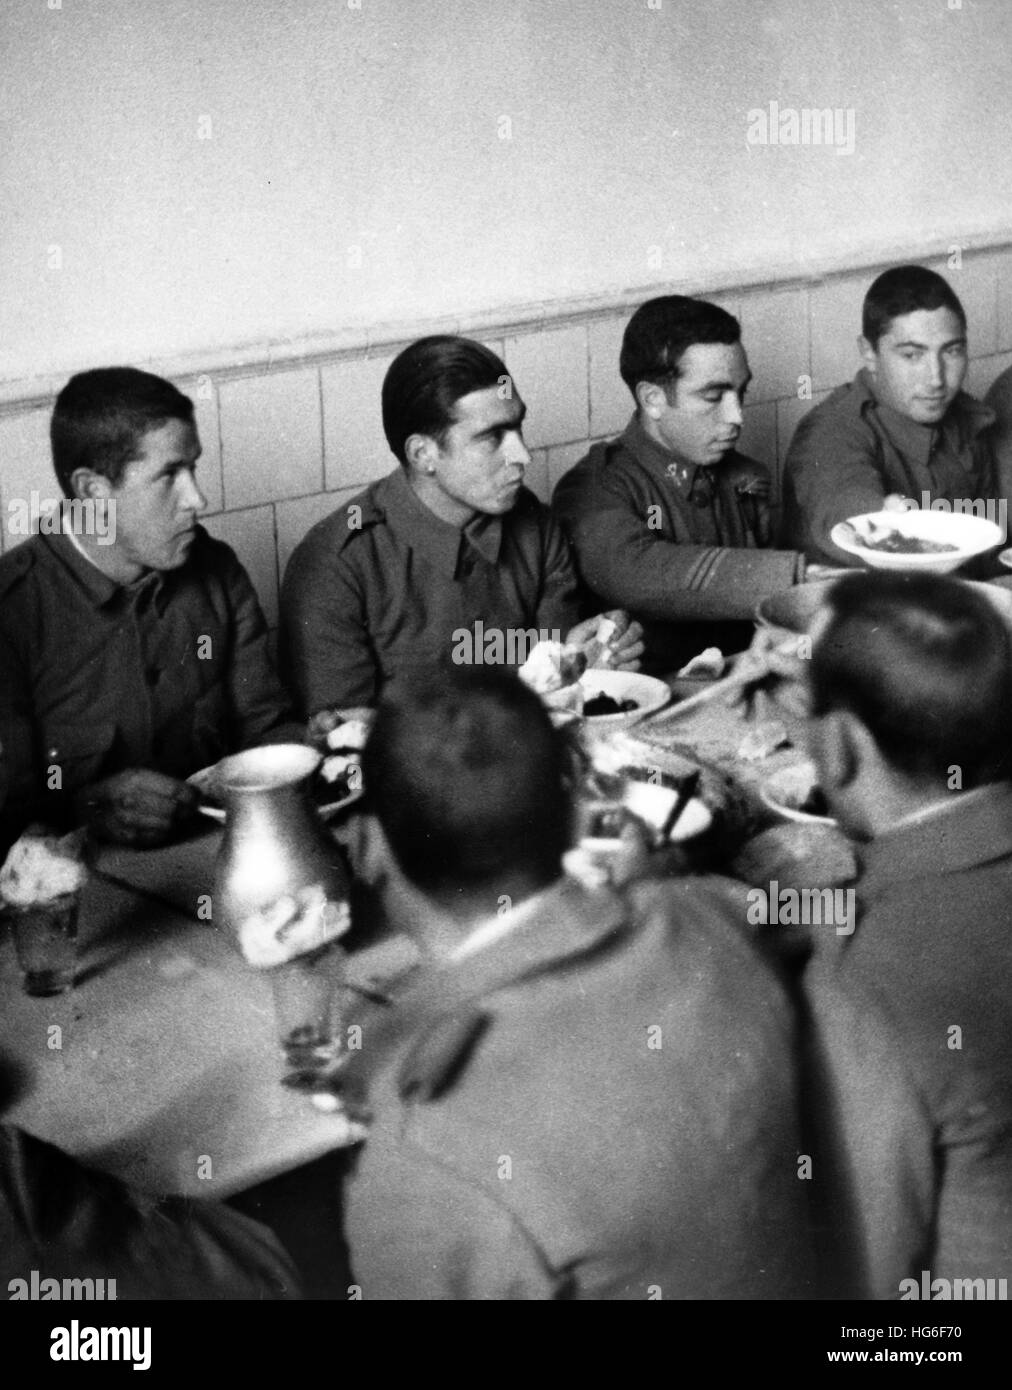 The Nazi propaganda picture shows new recruits of Francos troops during lunch in the cavalry barracks in Salamanca, Spain, February 1937. Fotoarchiv für Zeitgeschichtee - NO WIRE SERVICE - | usage worldwide Stock Photo